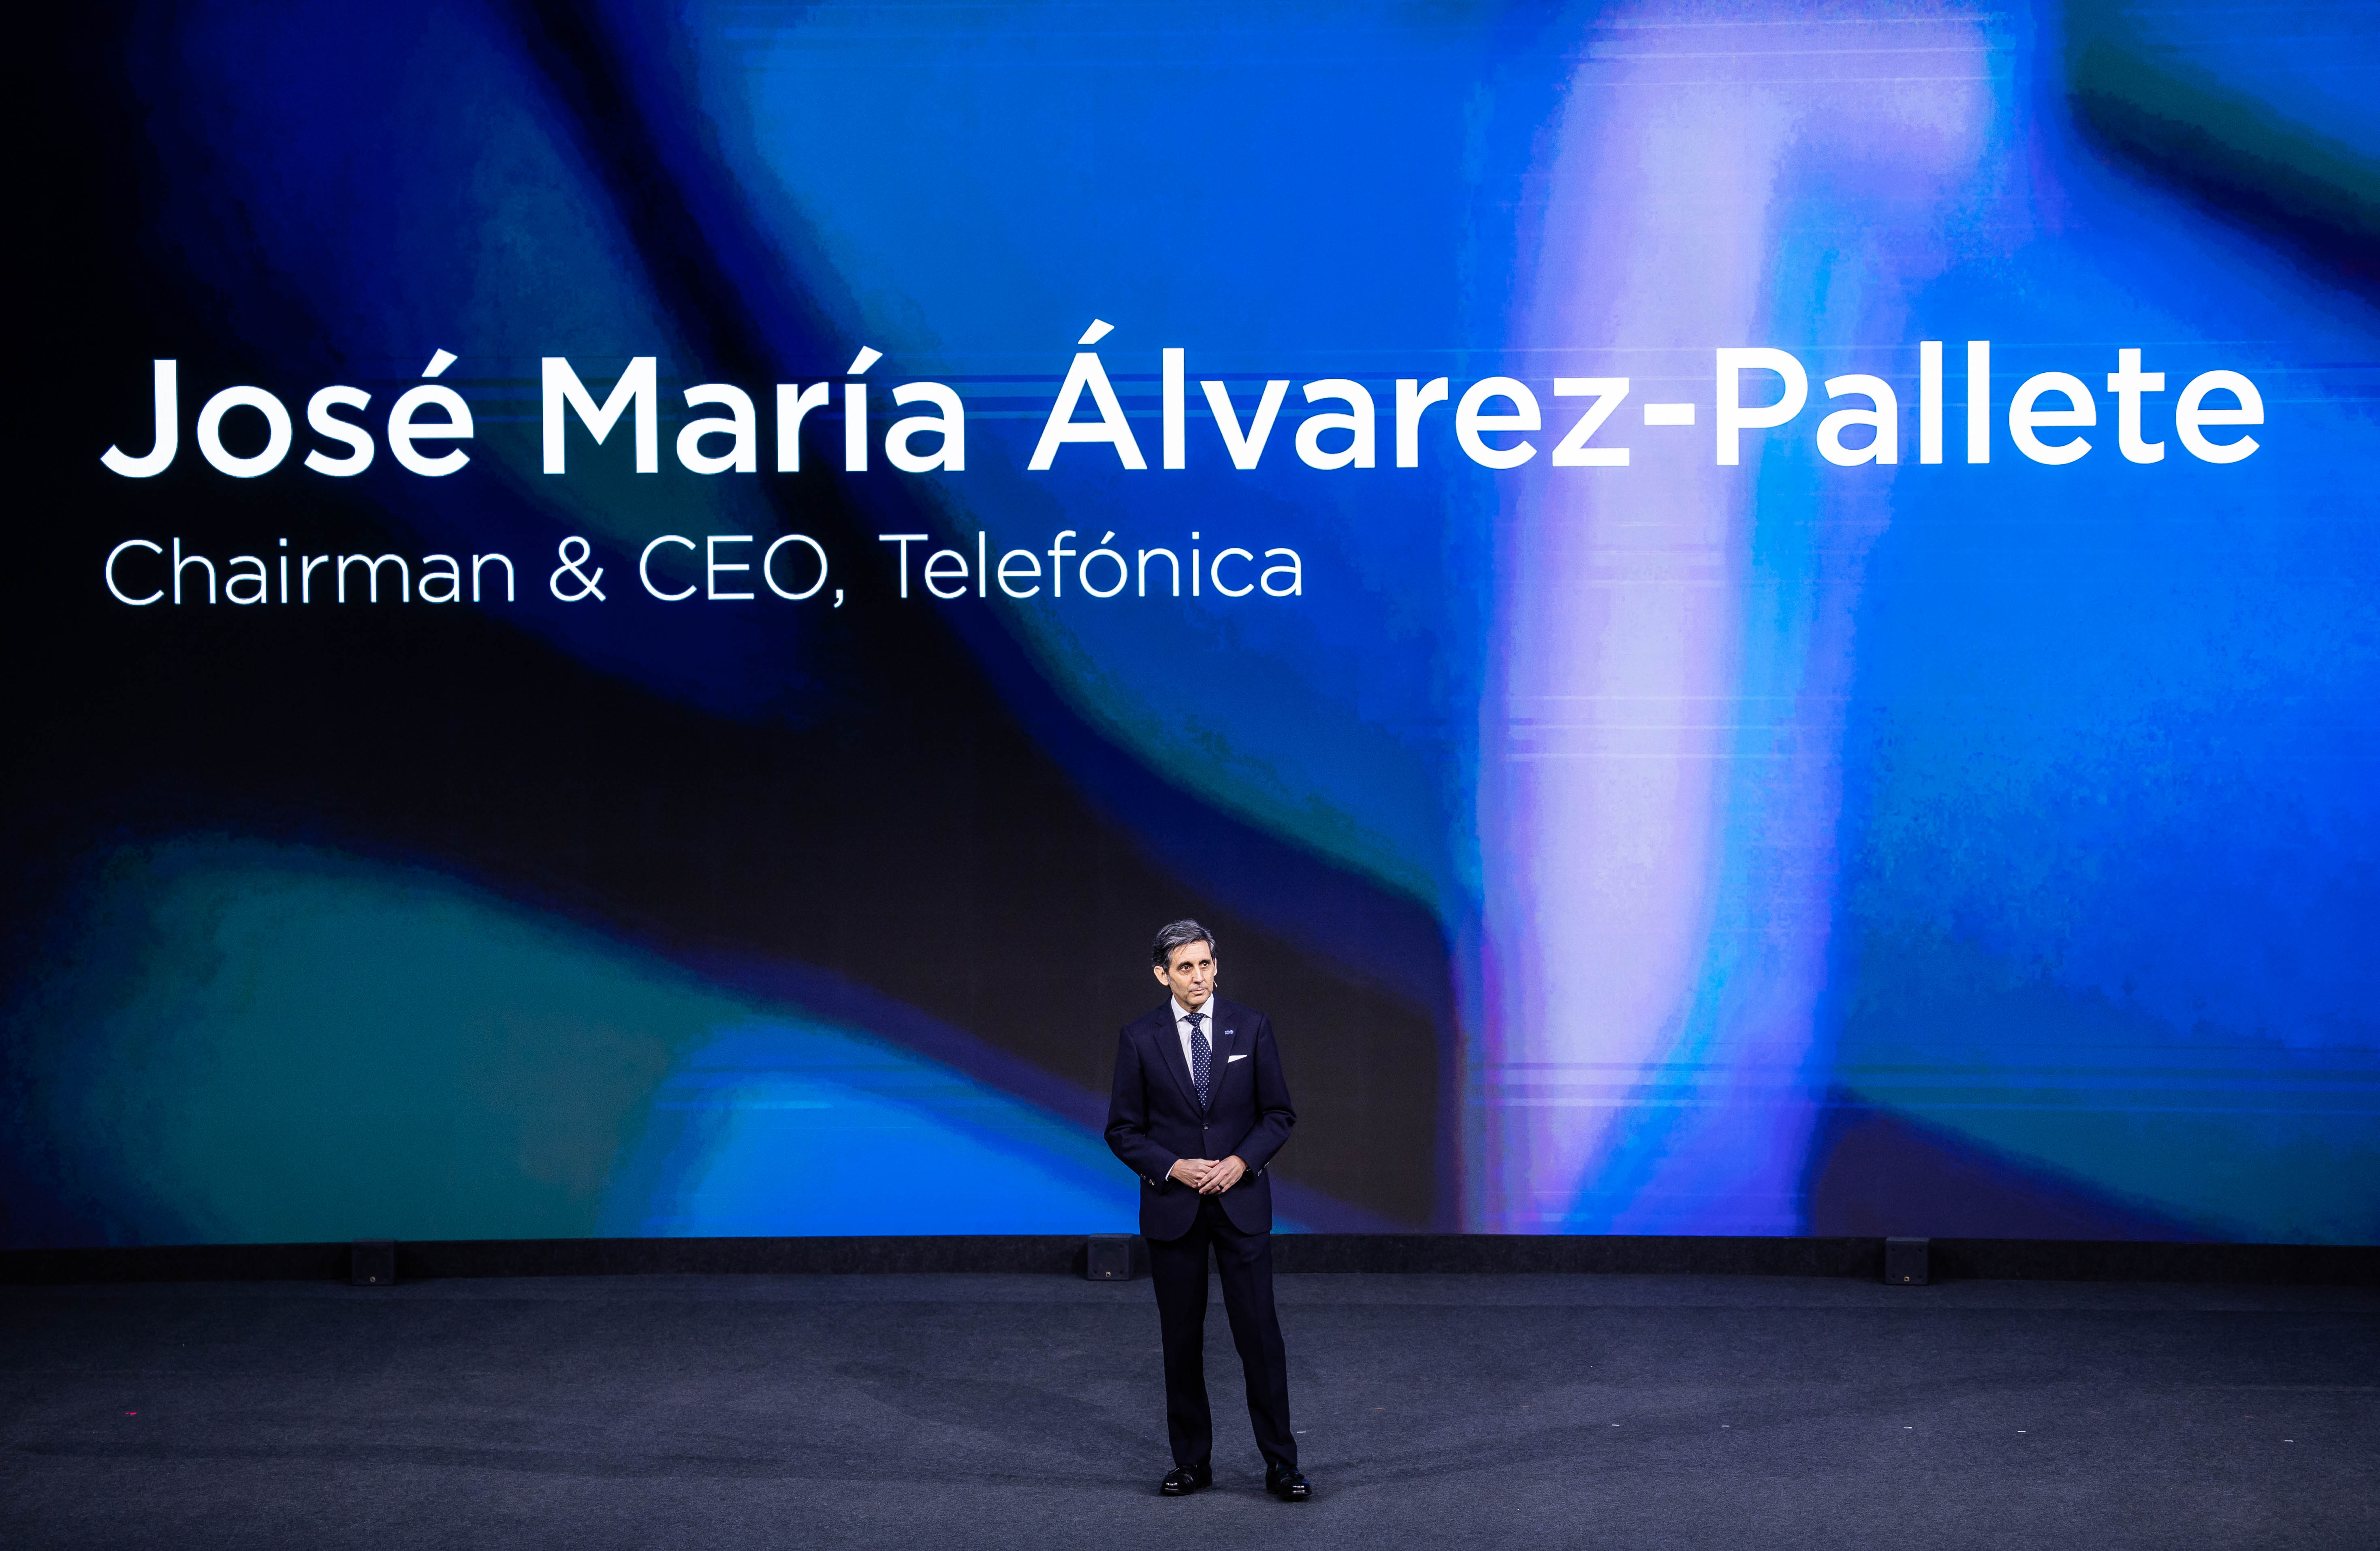 Telefónica and GSMA Chairman, José María Álvarez-Pallete, speaking at the opening session of the MWC24